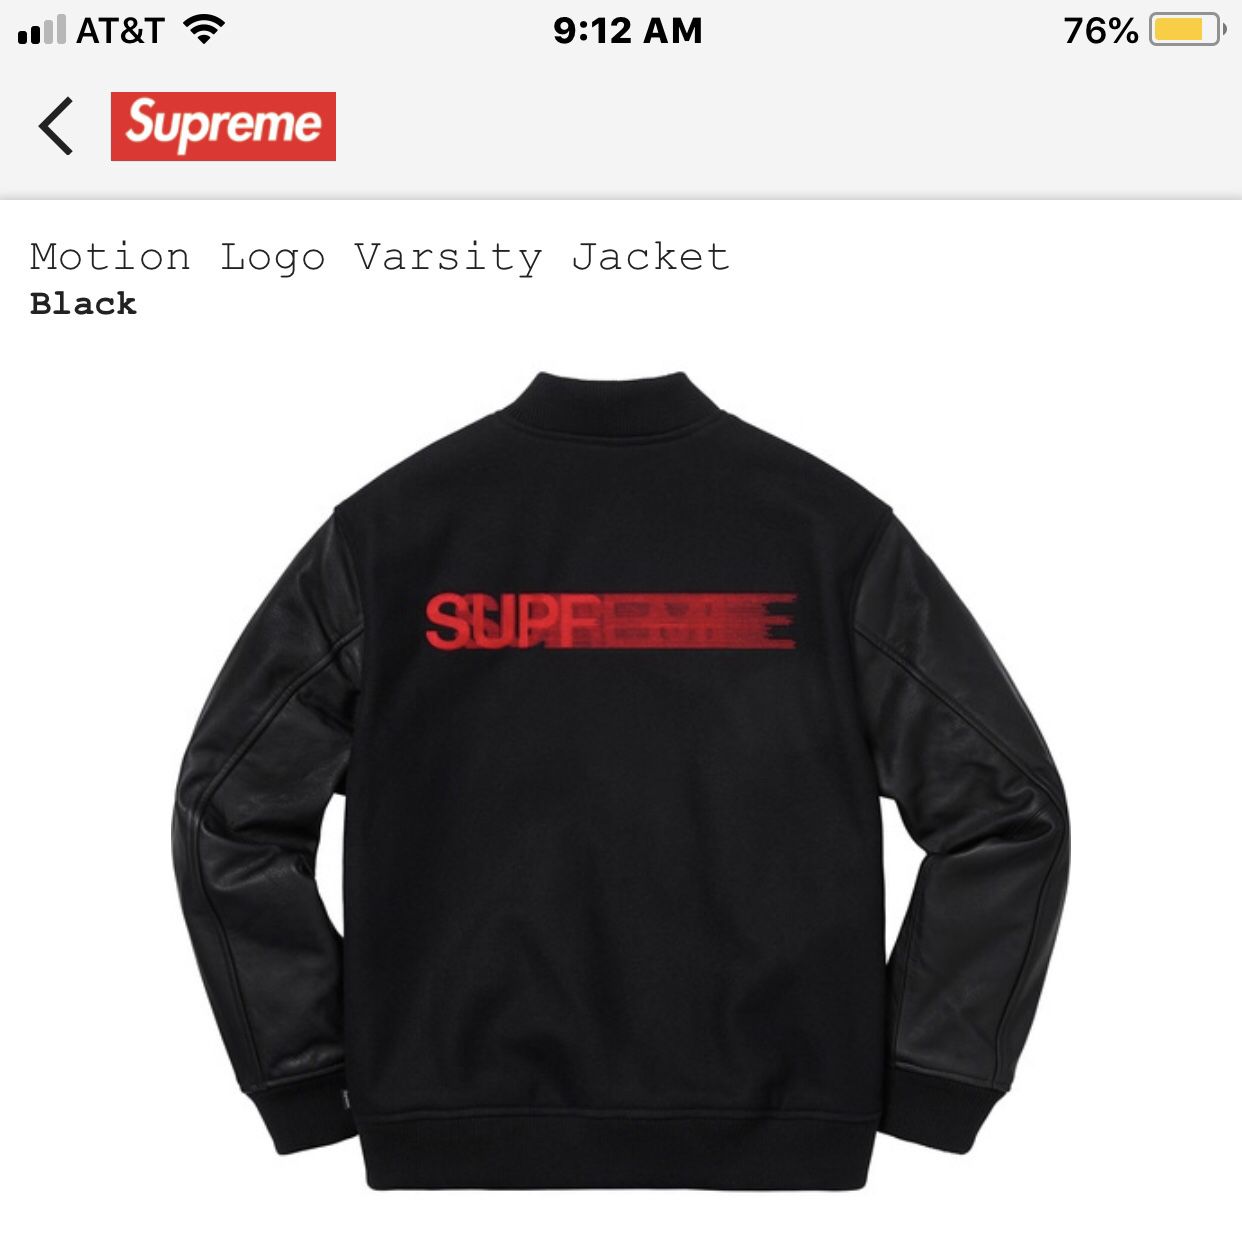 Supreme Motion Logo Varsity Jacket Black Size Small for Sale in Seattle, WA  - OfferUp